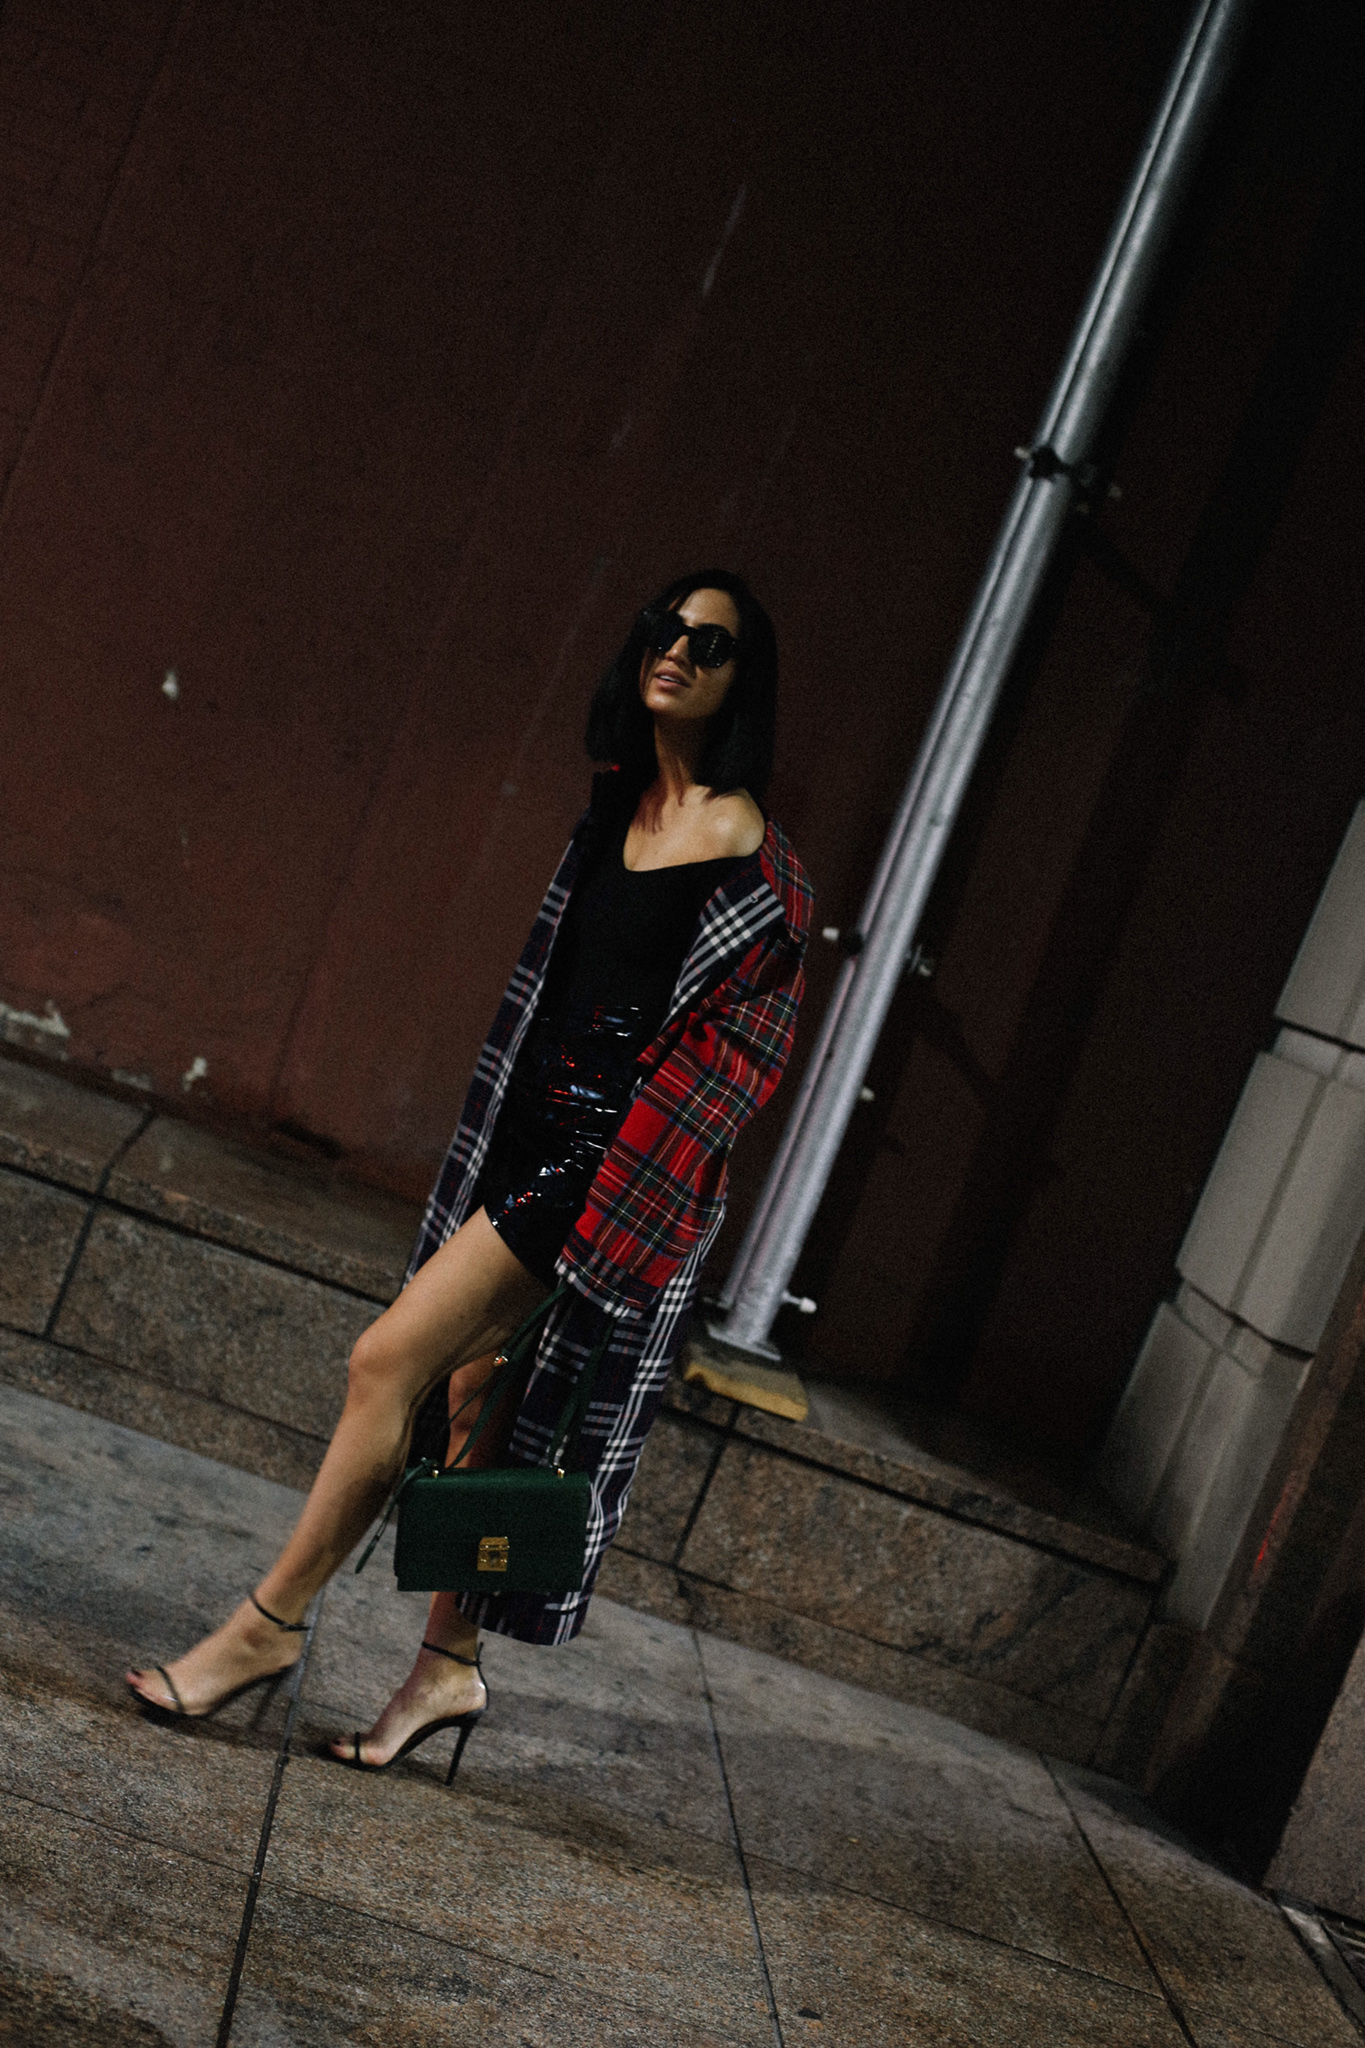 Top Fall Trends from NYFW 2018 | TSARIN.COM | Burberry Trench Coat, Tony Bianco Heels, Patent leather skirt, Plaid trench coat, plaid trend fall 2018, nyfw street style